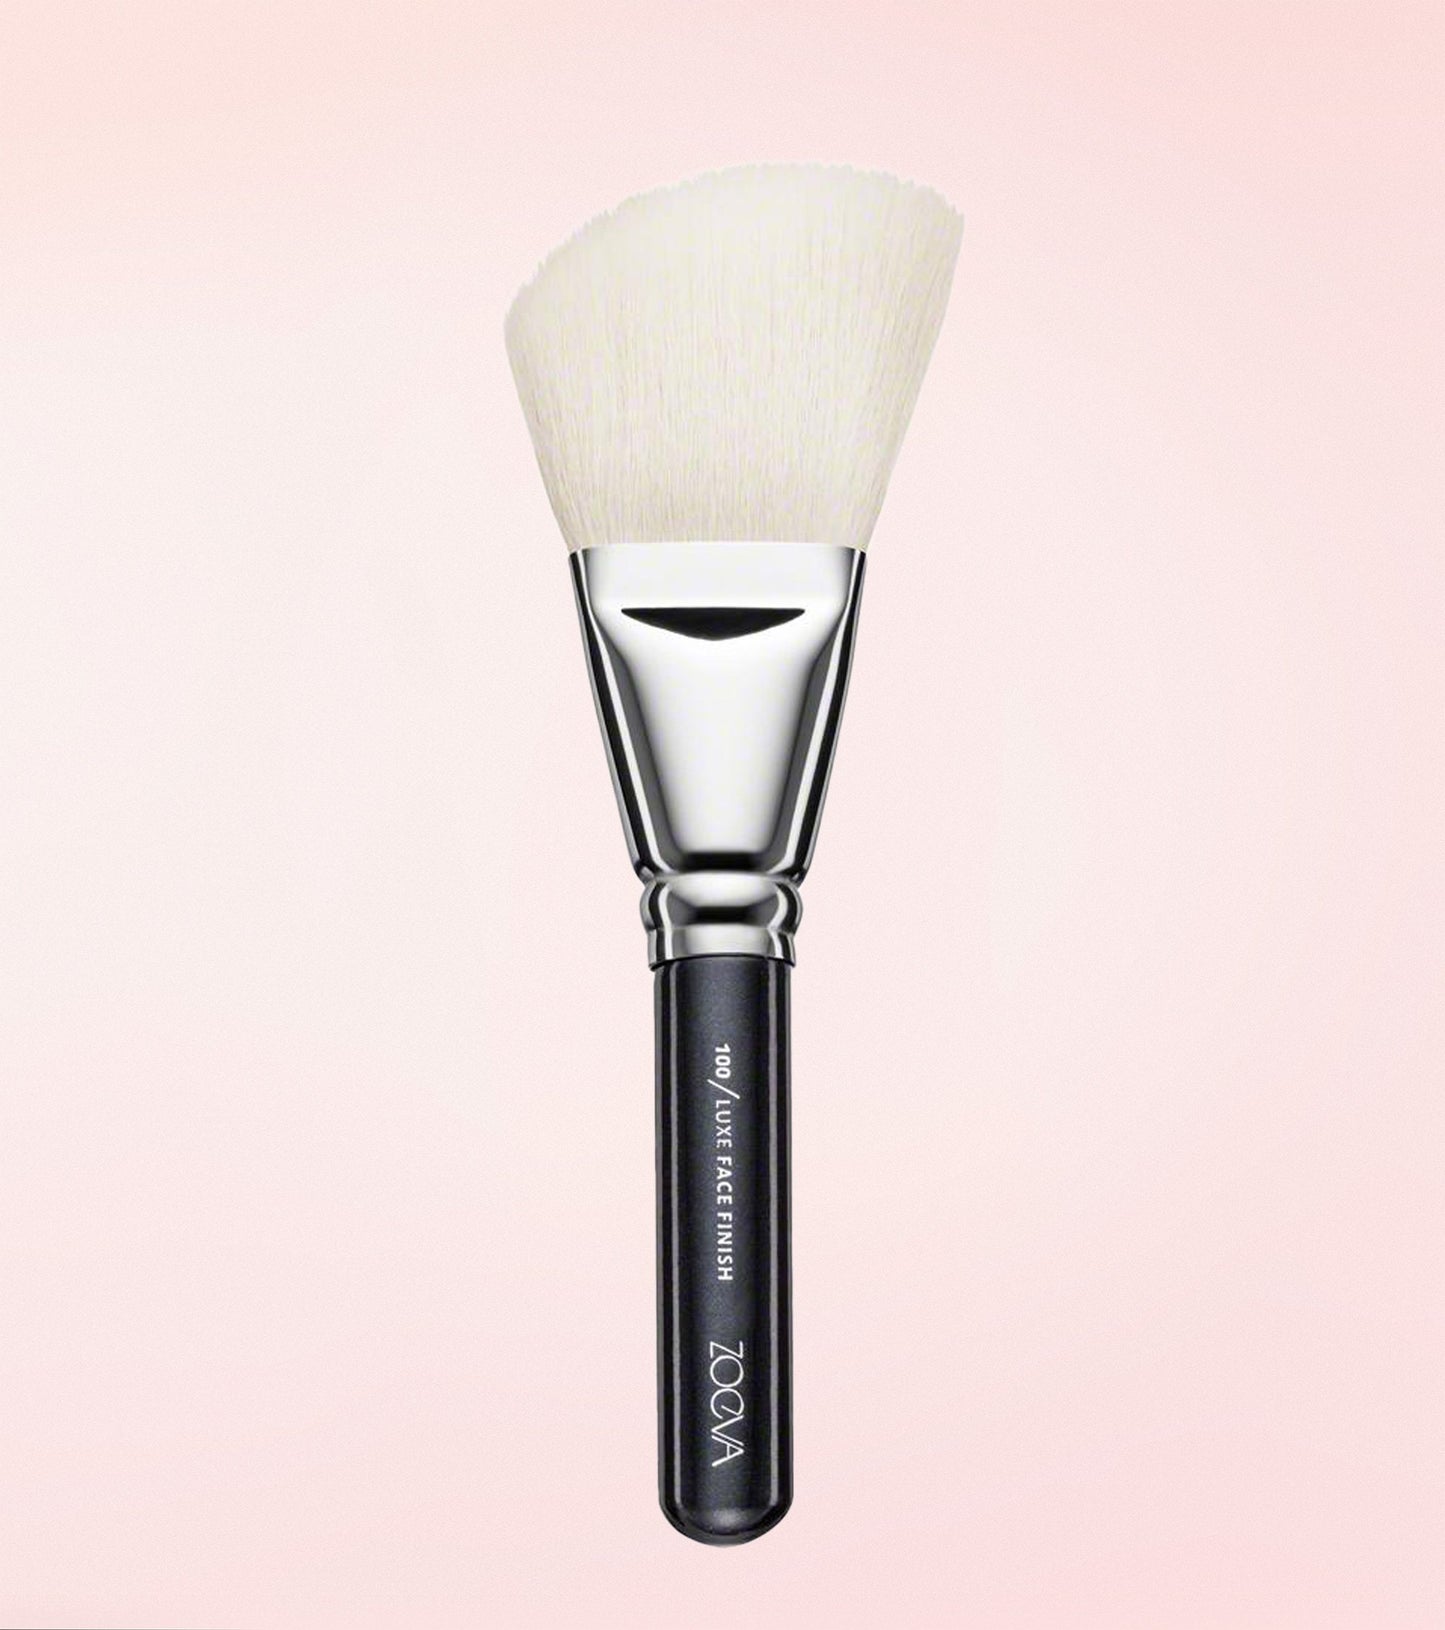 100 LUXE FACE FINISH BRUSH Expanded Image 1